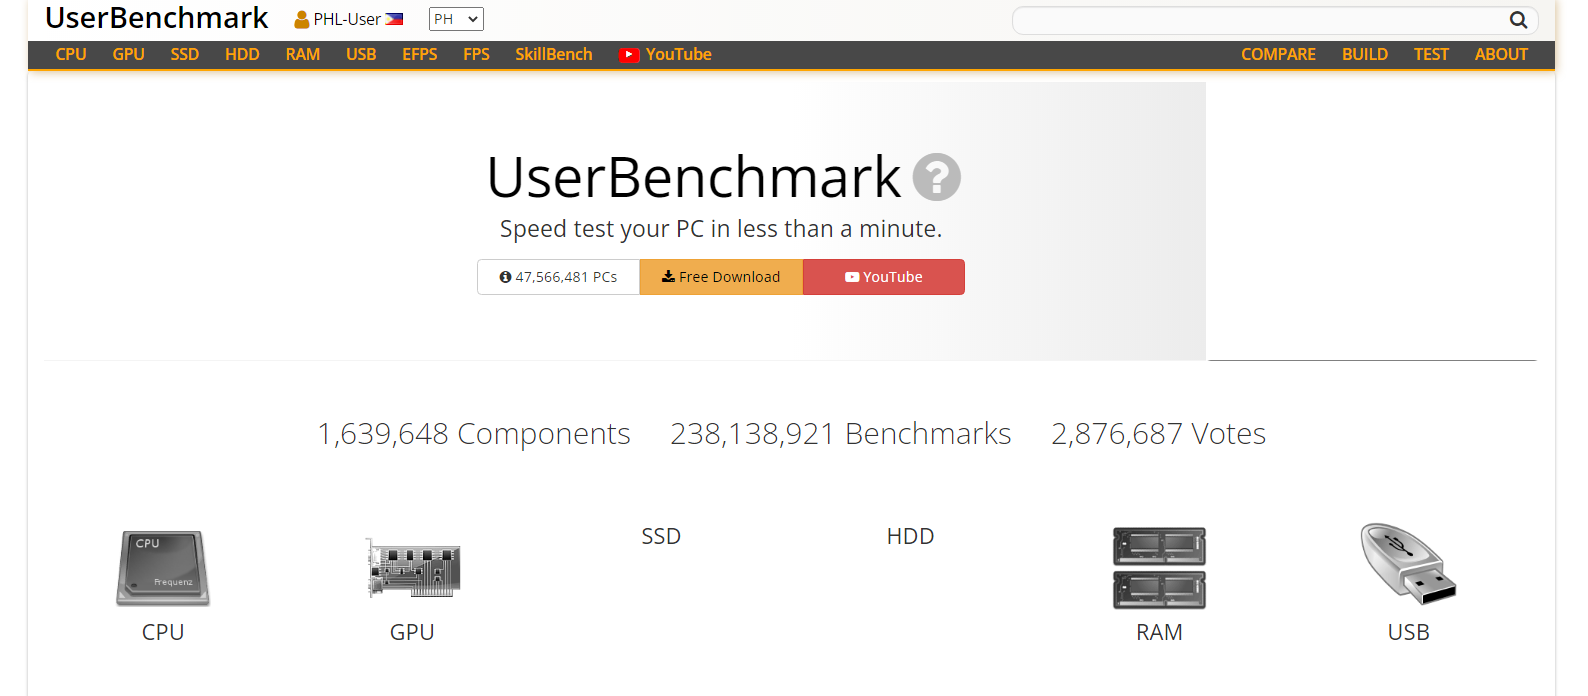 among benchmarking tools, userbenchmark is a popular option 